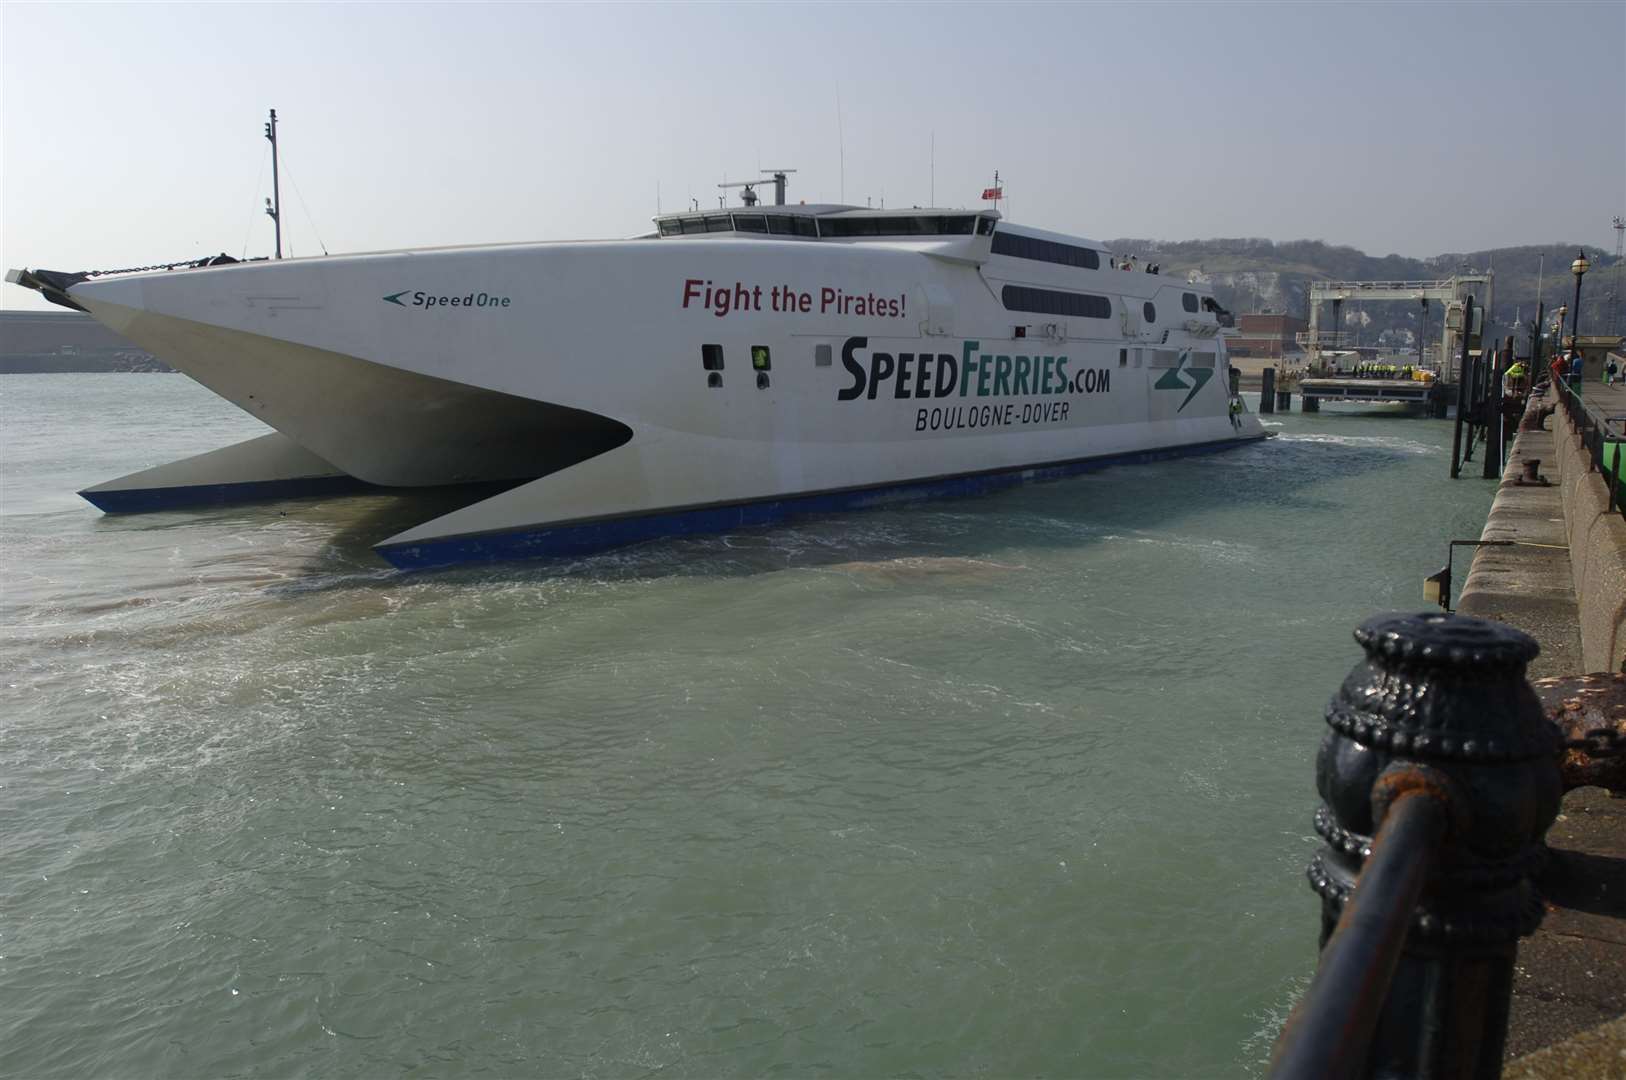 SpeedFerries operated a short-lived Dover to Boulogne service